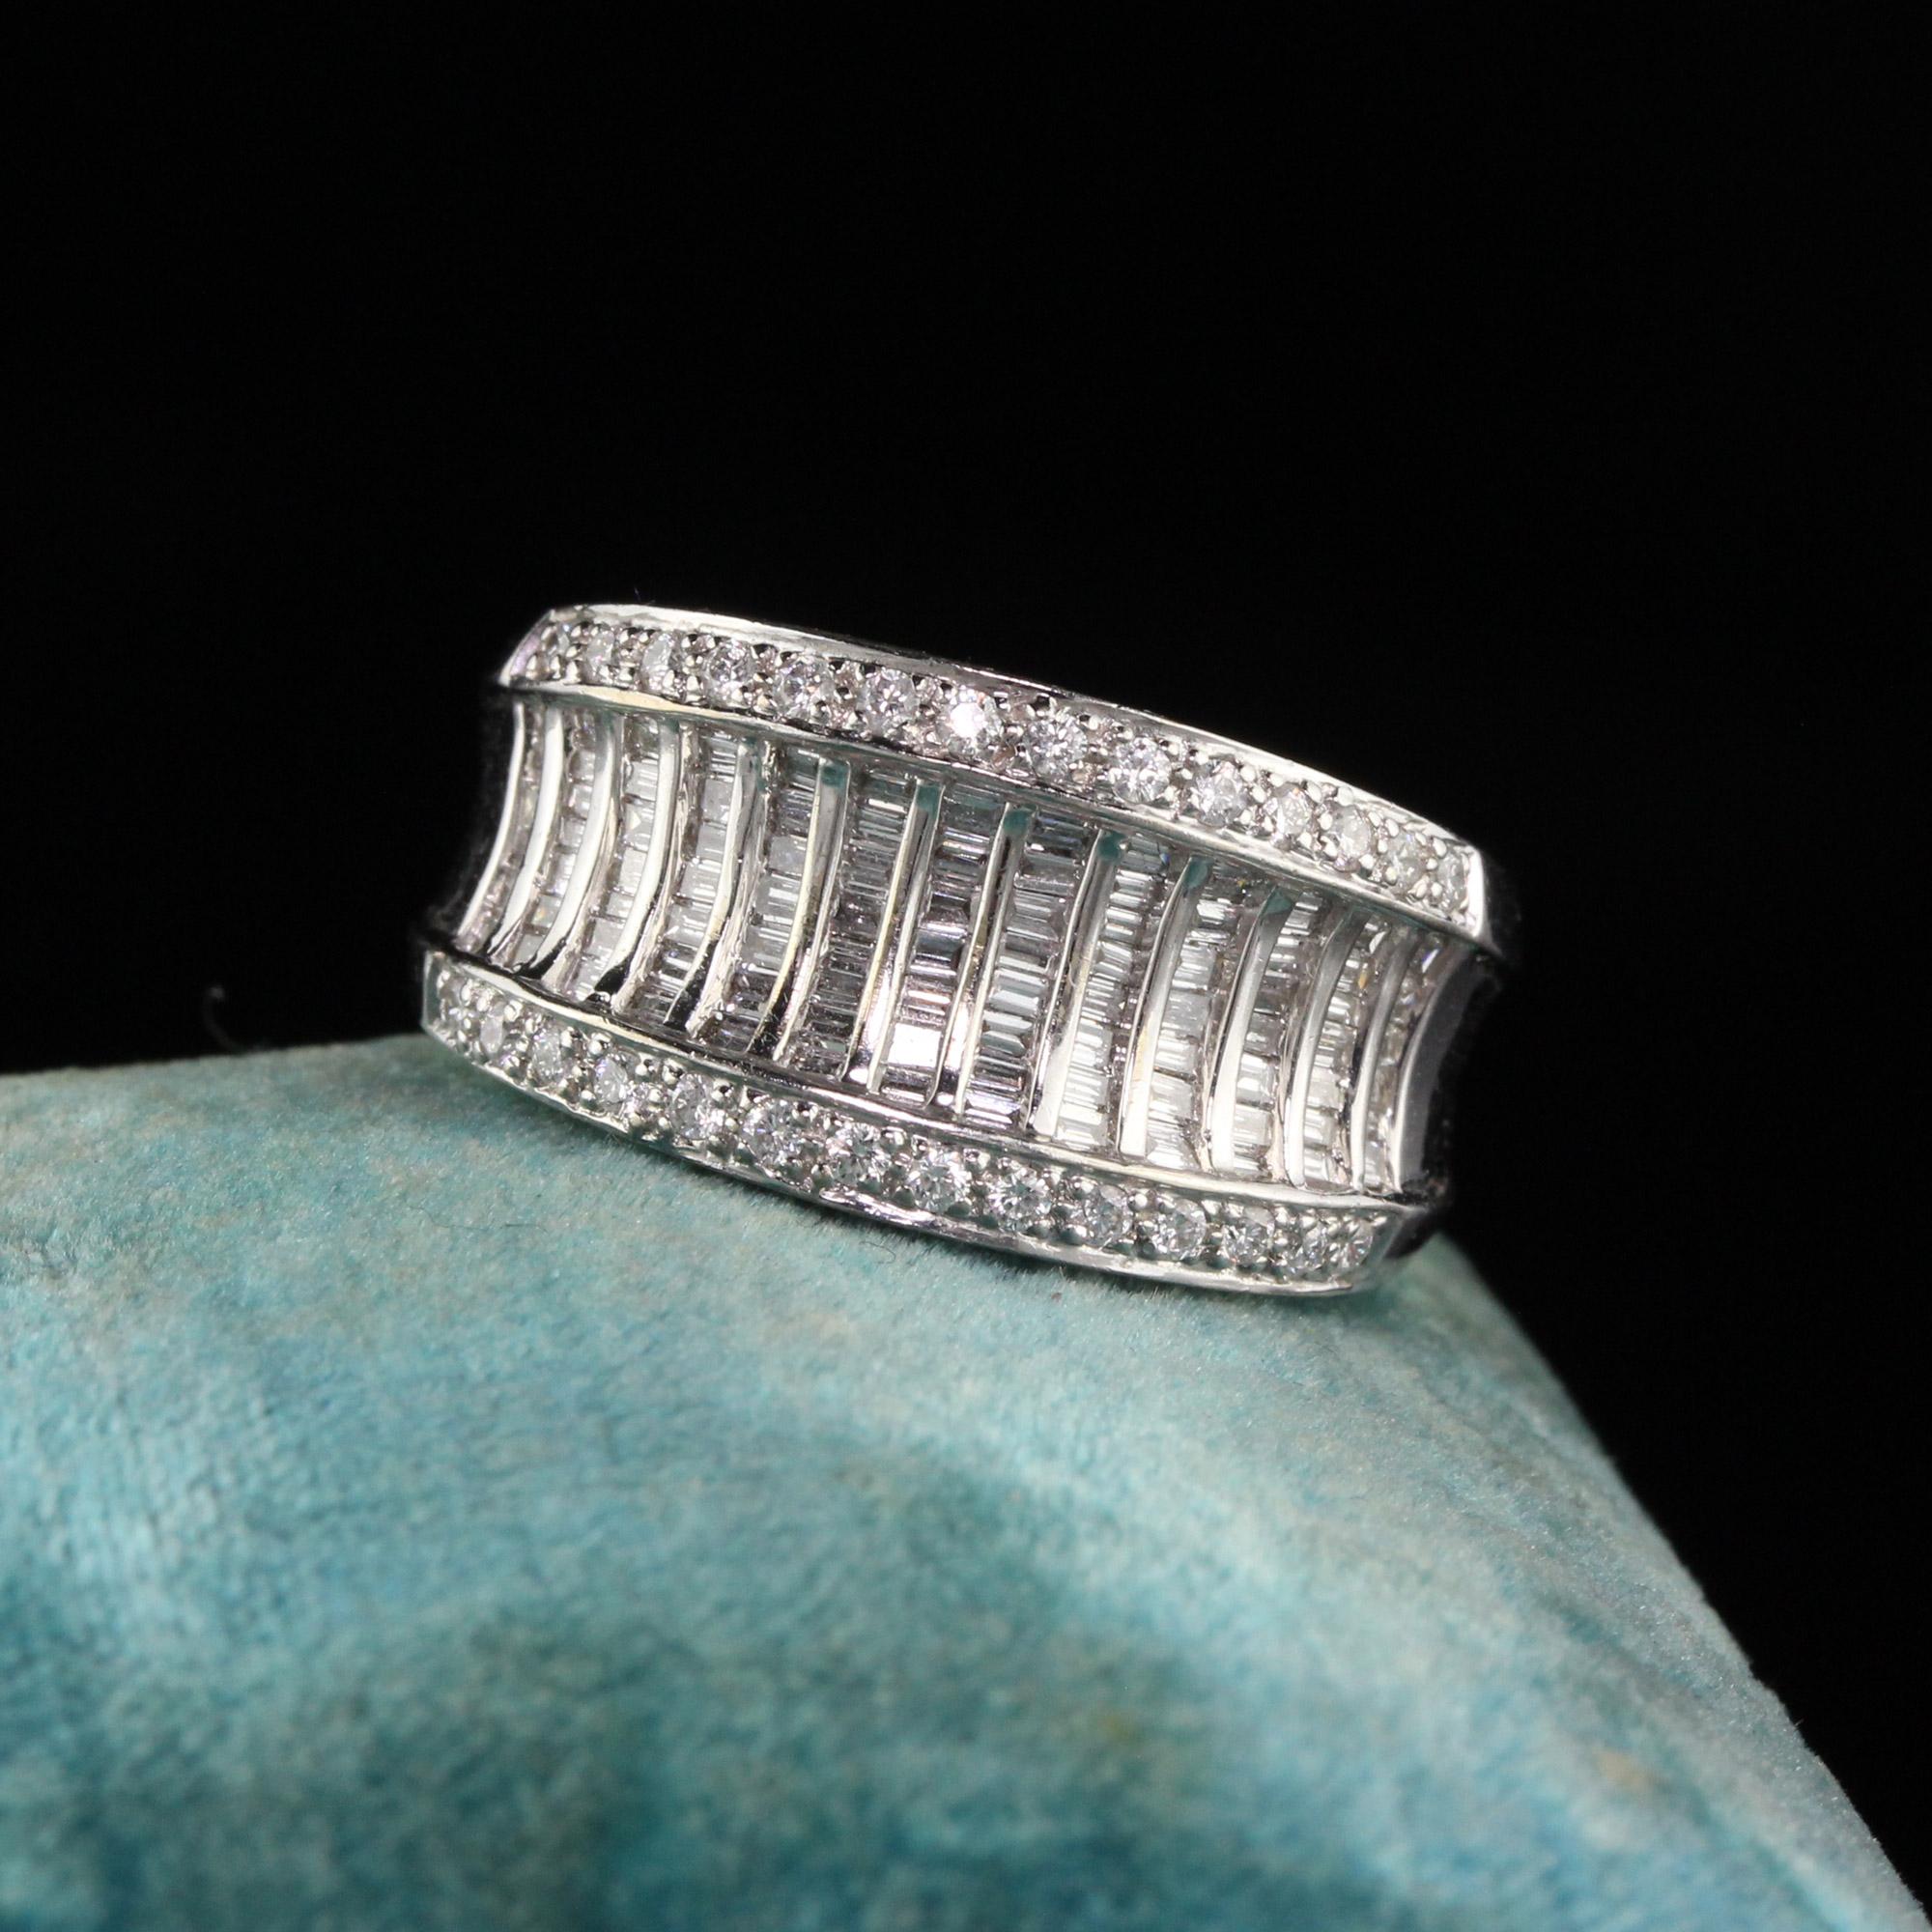 Dazzling wide gold diamond band.

Metal: 18K White Gold

Weight: 10.4 Grams

Total Diamond Weight: Approximately 1 ct.

Diamond Color: H

Diamond Clarity: SI1

Ring Size: 6.5 (sizable)

Measurements: 11.12 x 4.47 mm
